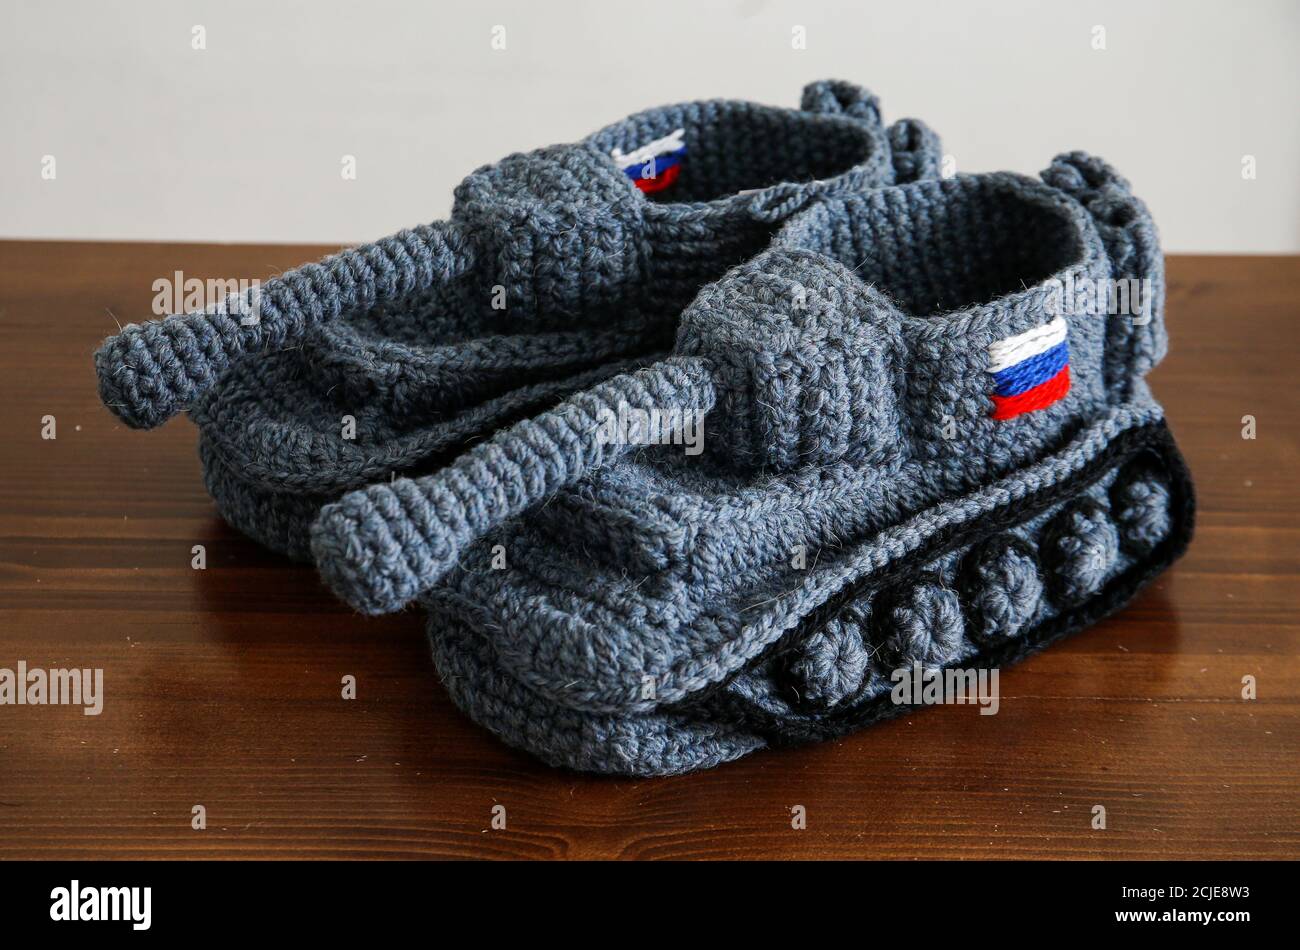 Tanks shaped slippers called "Tapki Tanki" (Tank-slippers) are seen in a  crafting shop in Saint Petersburg, Russia February 13, 2019. Picture taken  February 13, 2019. REUTERS/Anton Vaganov Stock Photo - Alamy